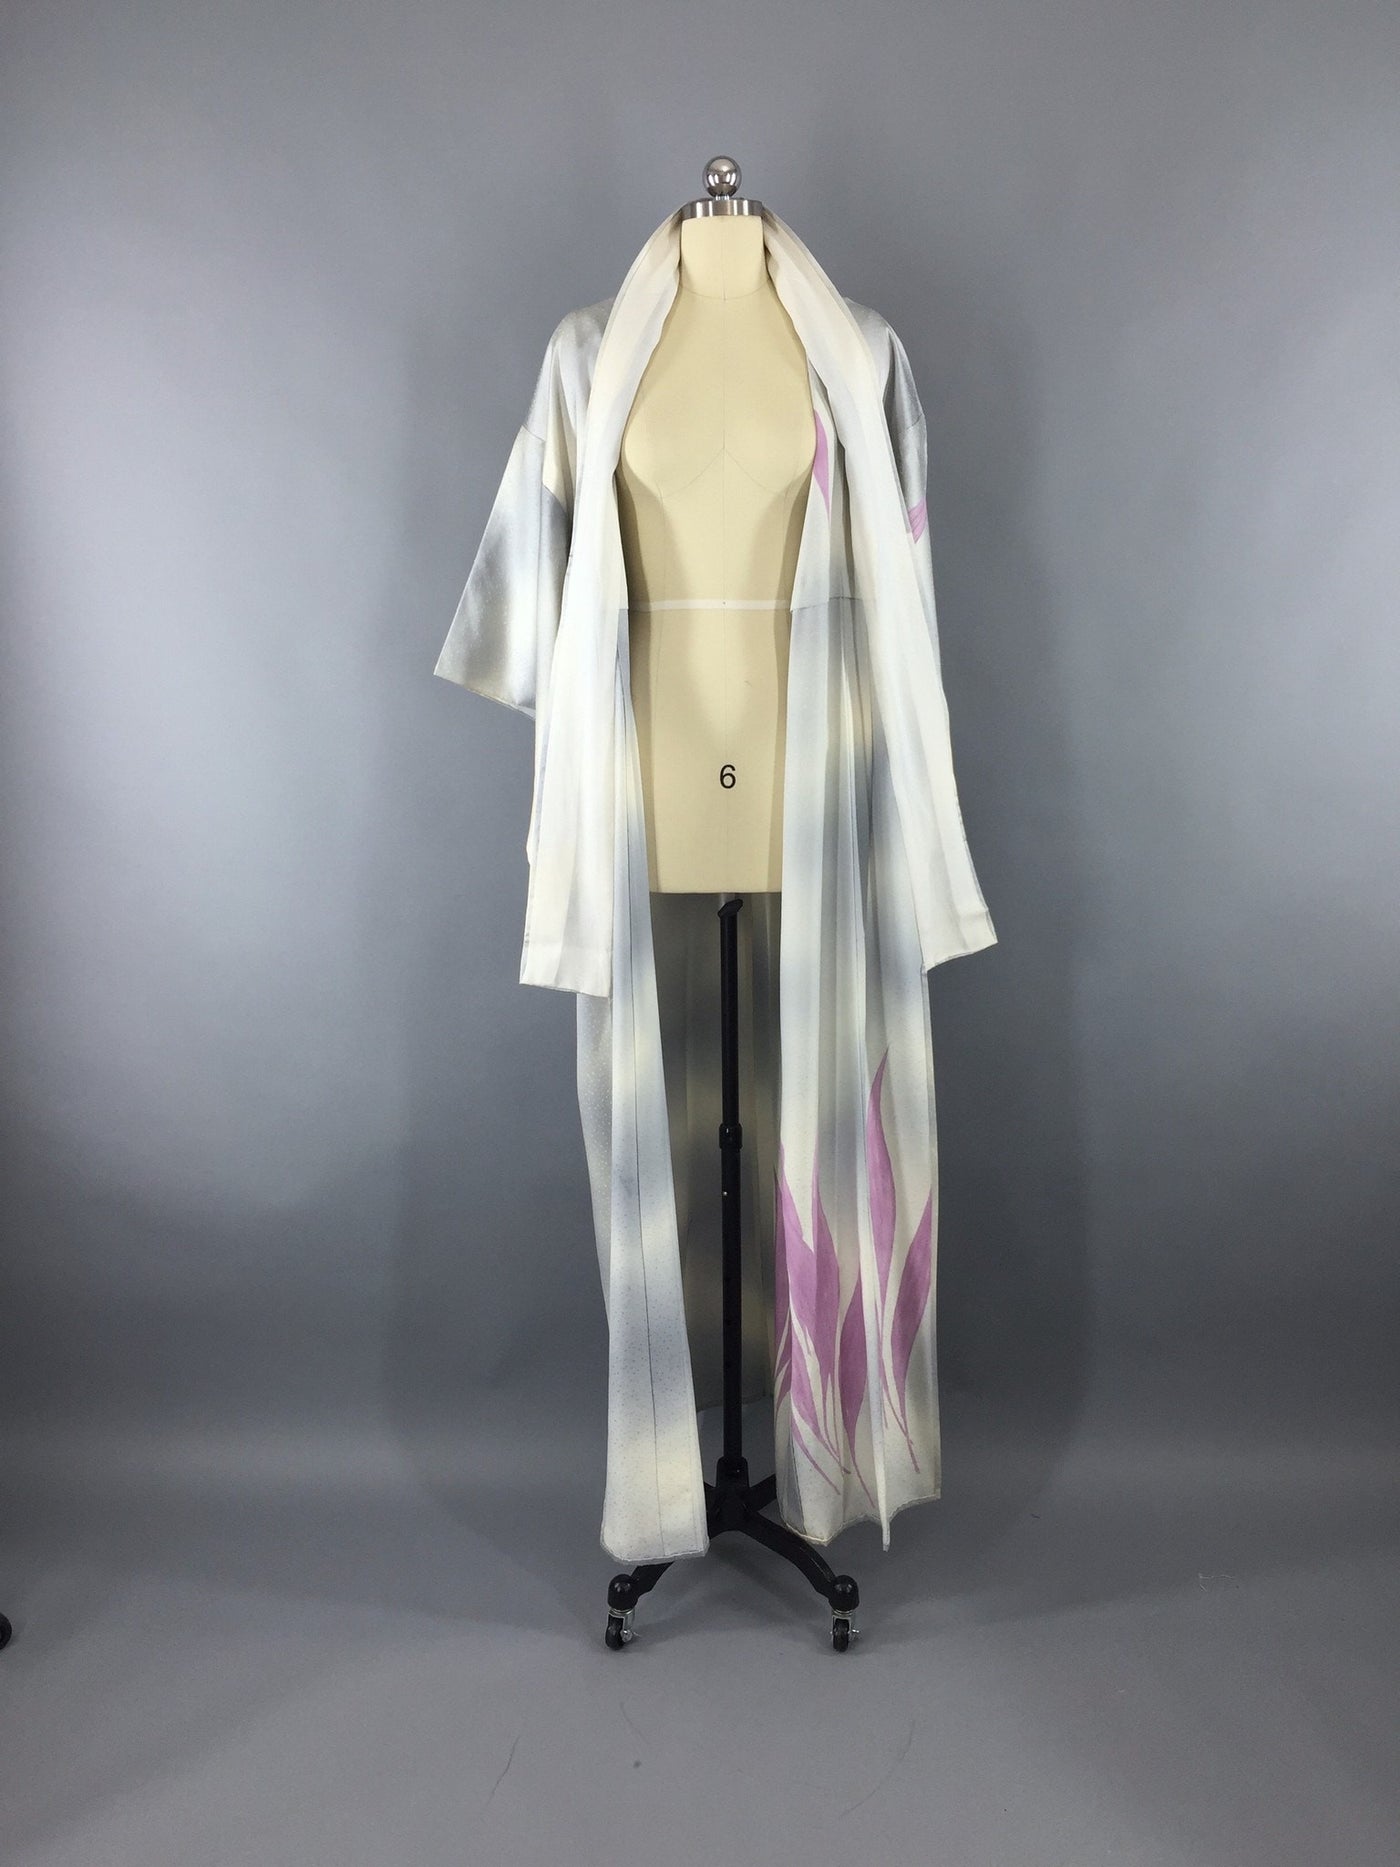 1970s Vintage Silk Kimono Robe with Grey and Pink Leaves Floral Print - ThisBlueBird